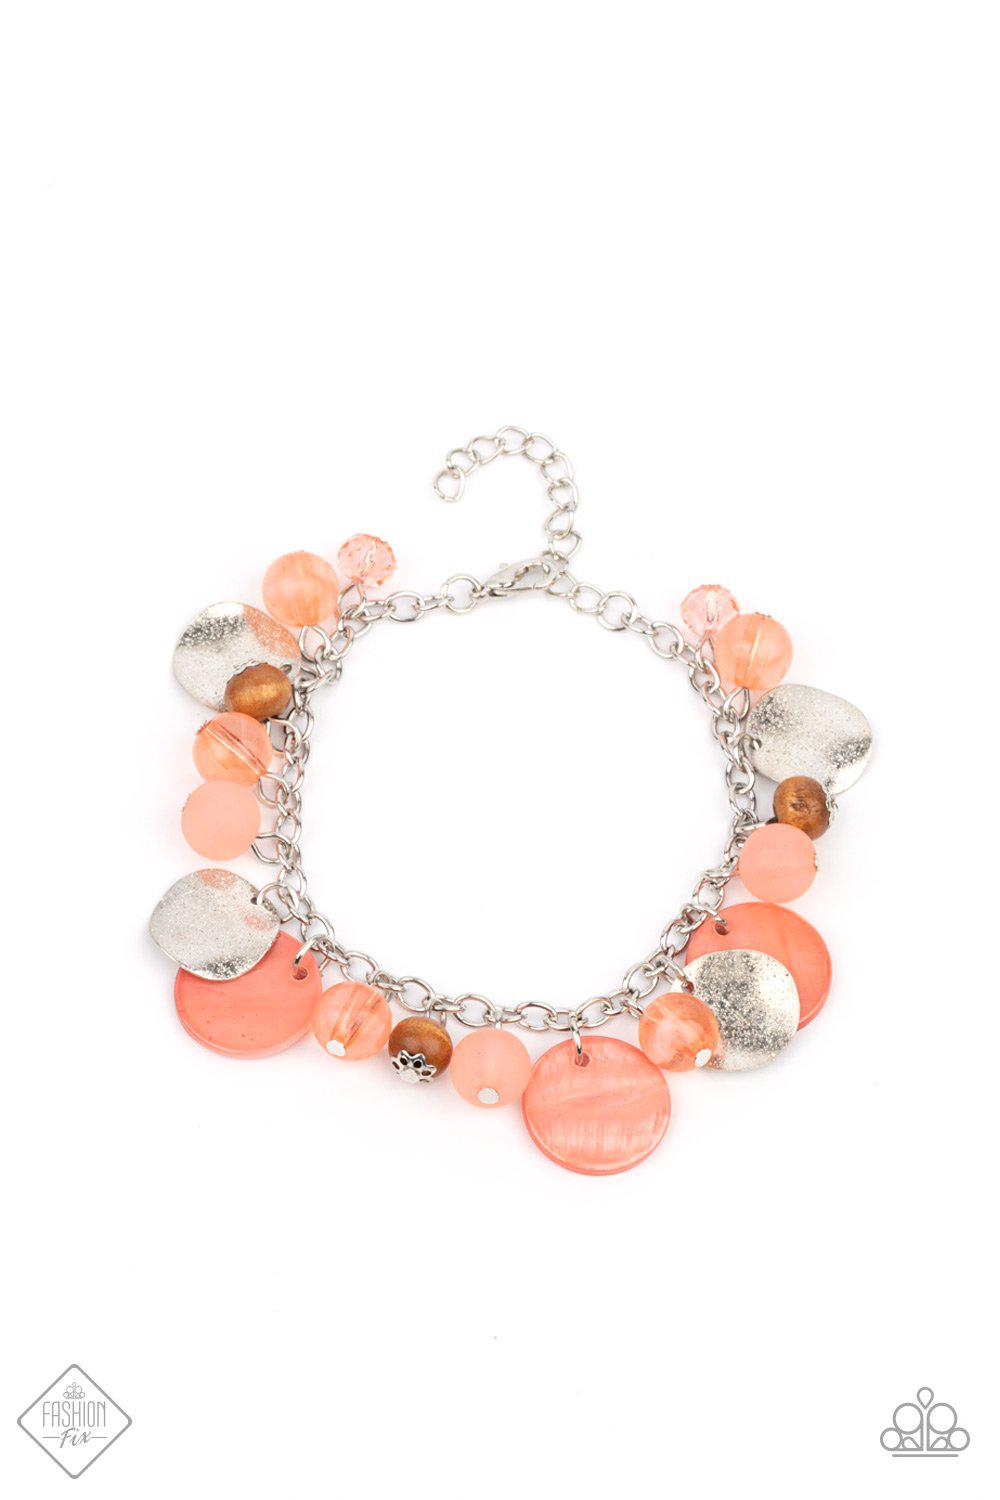 Springtime Springs Coral and Silver Bracelet Set - Paparazzi Accessories- lightbox - CarasShop.com - $5 Jewelry by Cara Jewels